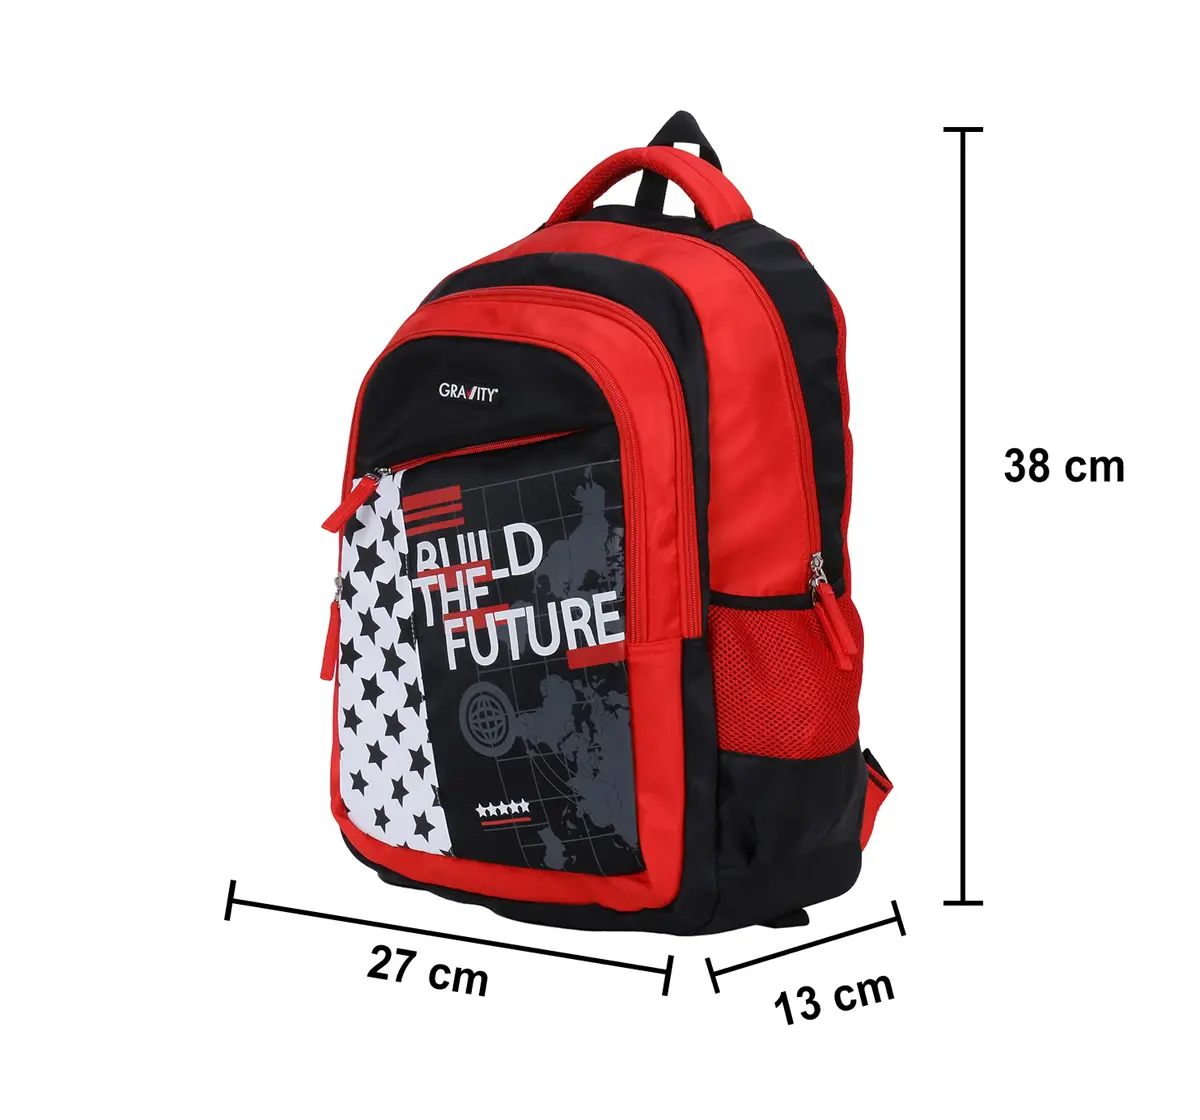 Simba Gravity Build The Future 15 Backpack Multicolor 3Y+